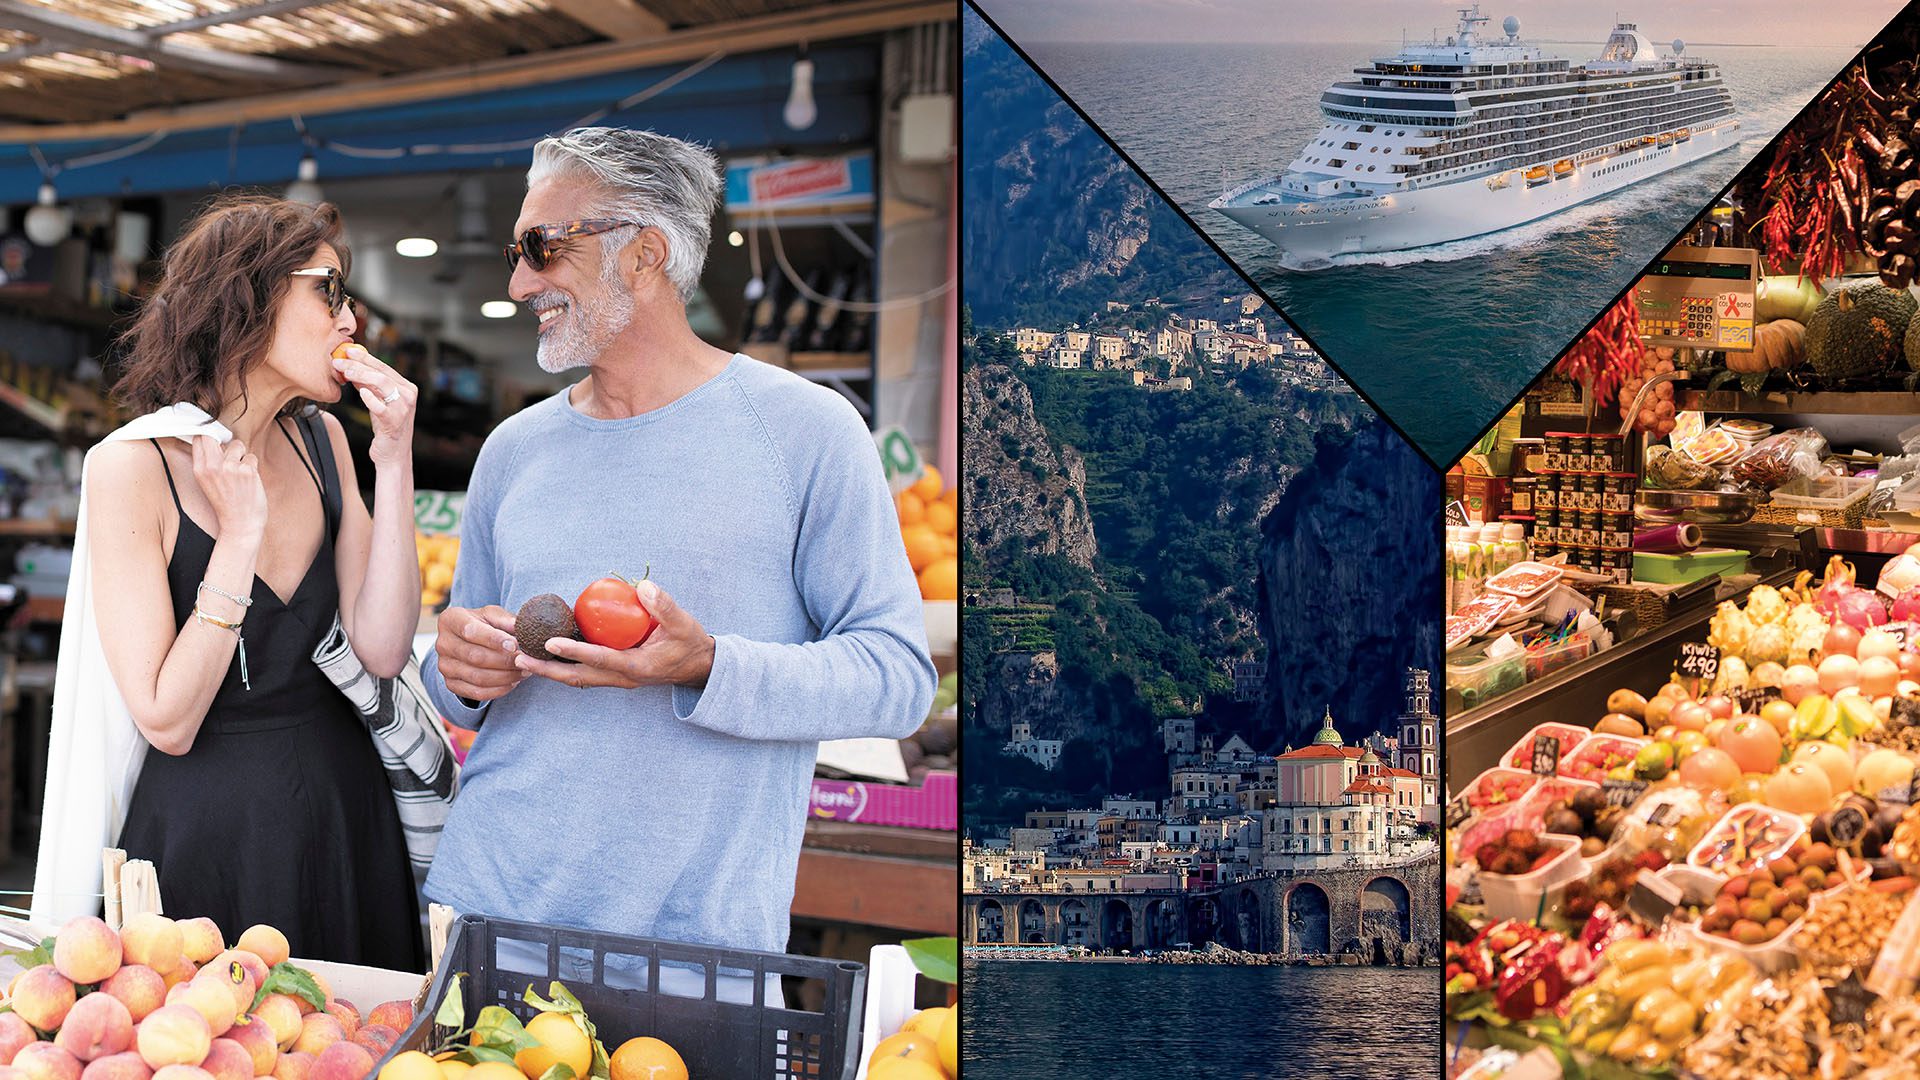 Regent Seven Seas Cruises Epic Mediterranean Food Expedition, images were provided by Regent Seven Seas Cruises®